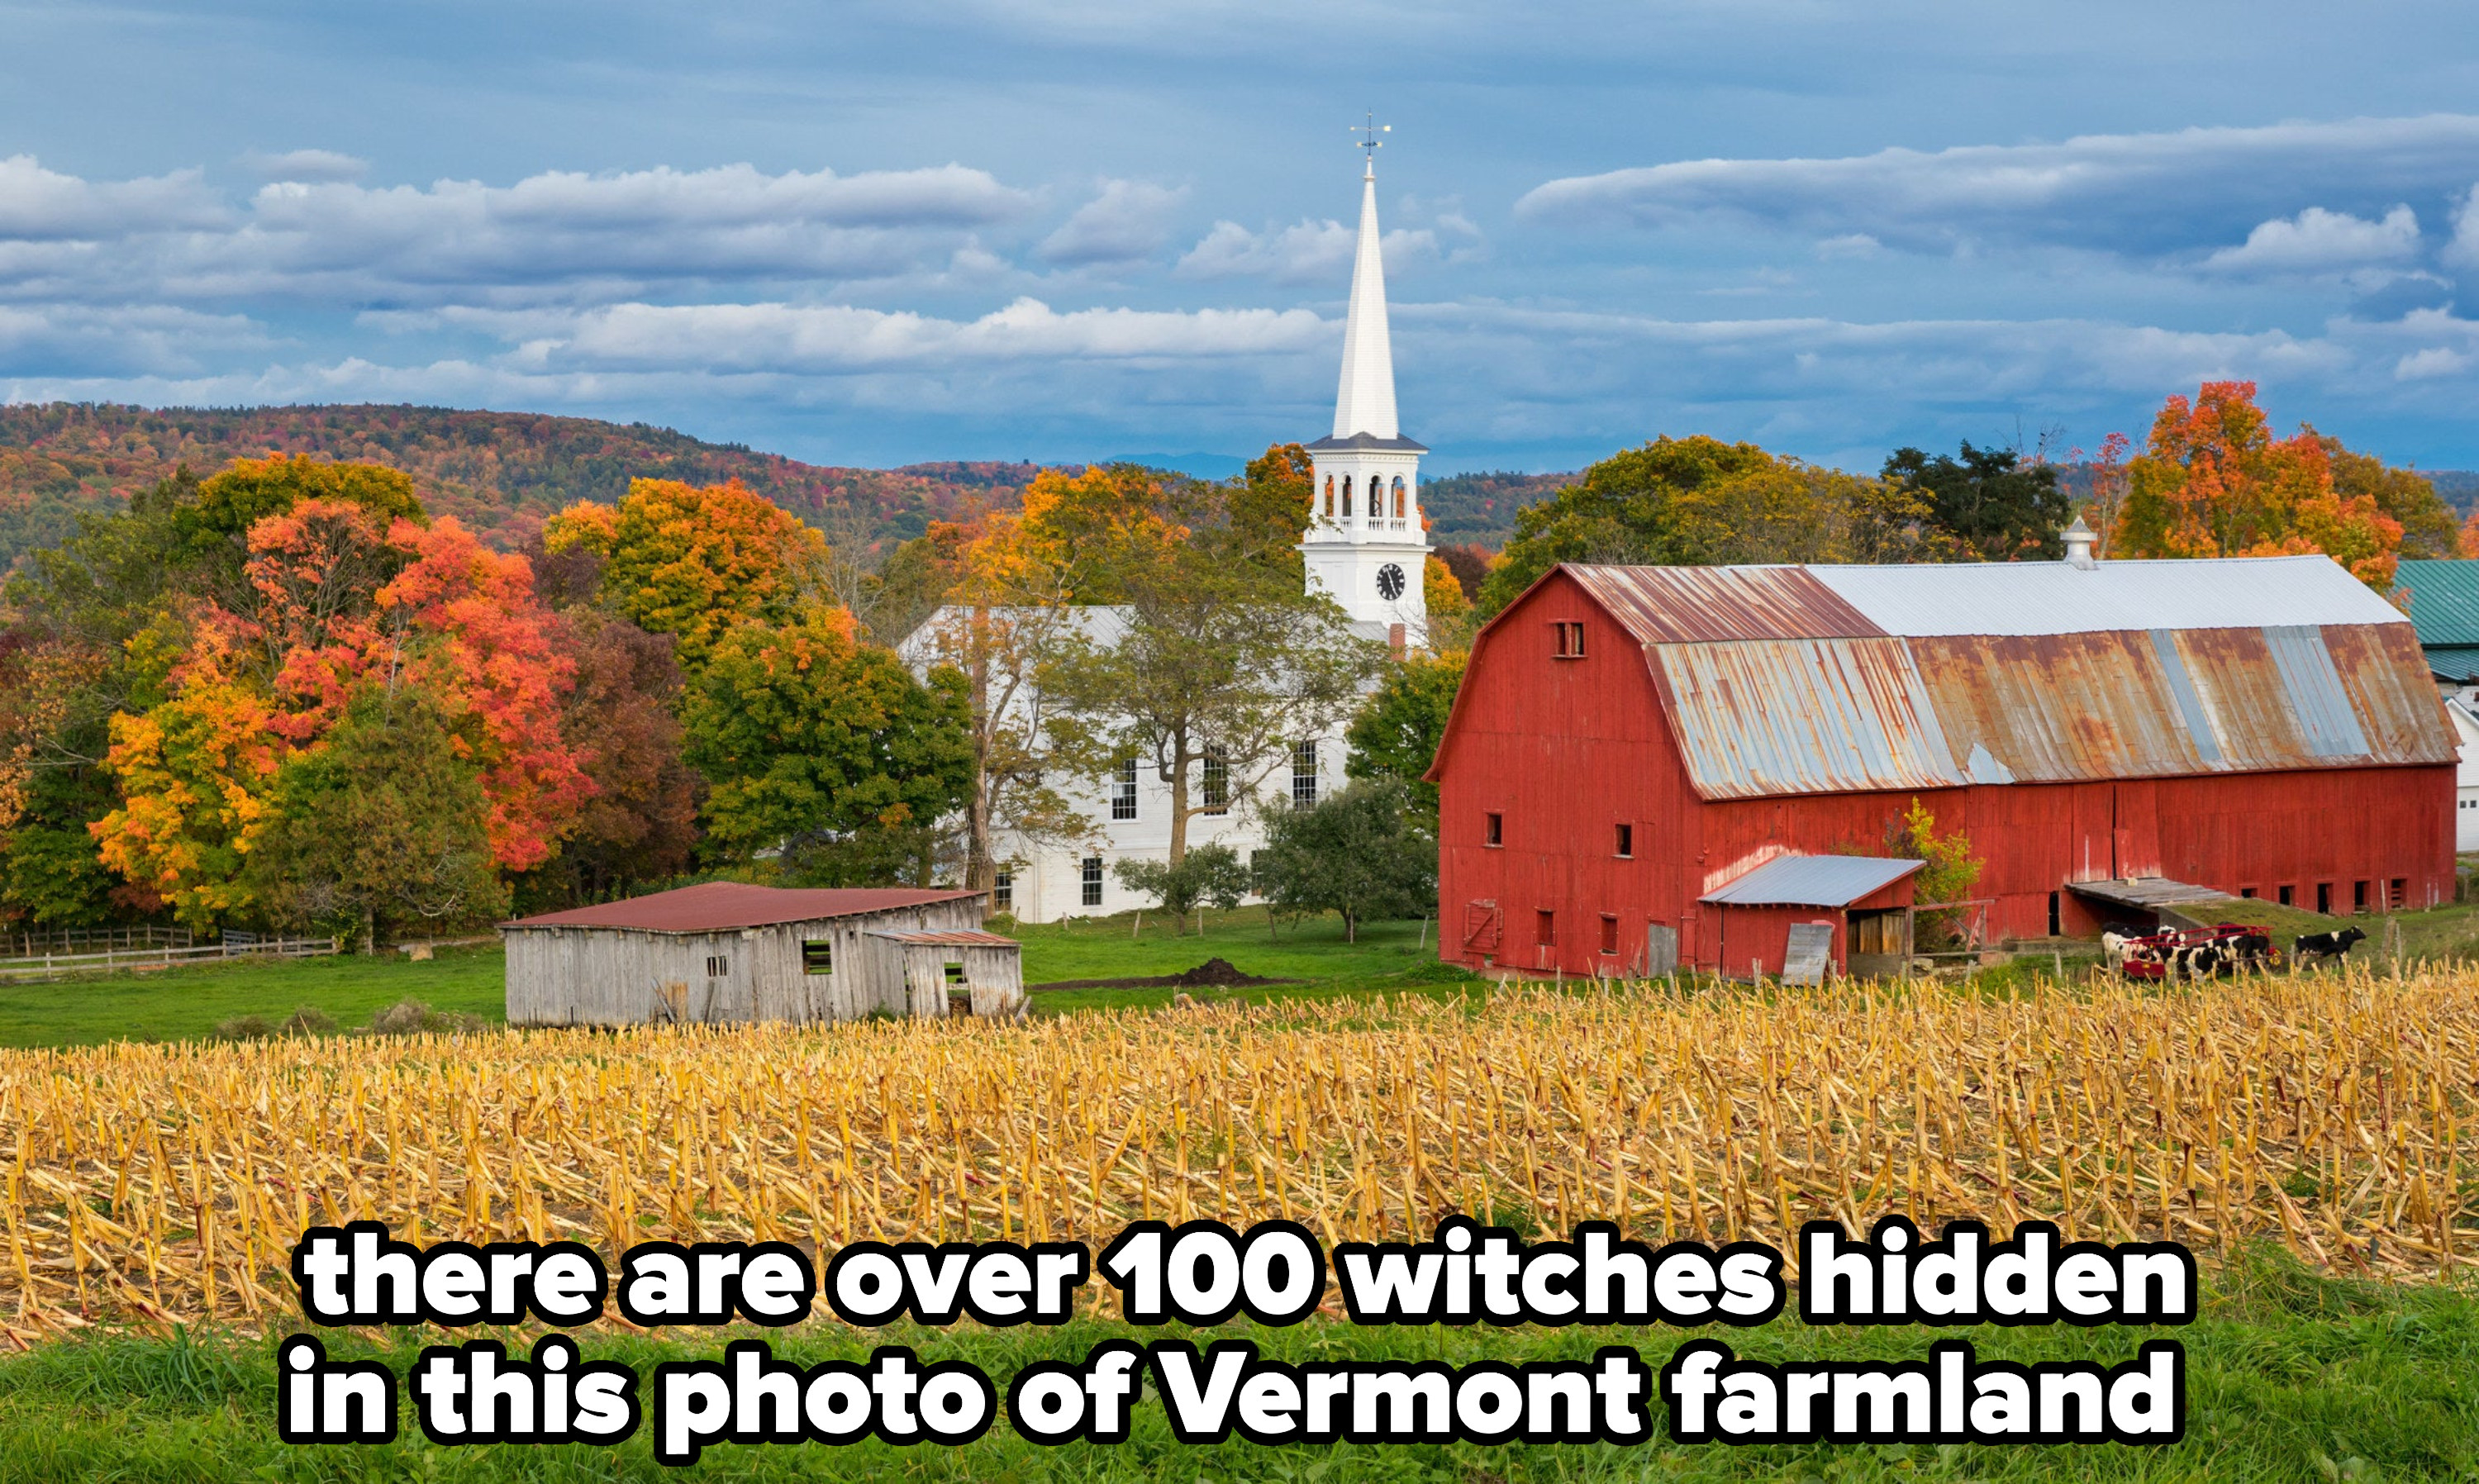 a rustic farm in vermont, with caption: there are over 100 witches hidden in this photo of Vermont farmland